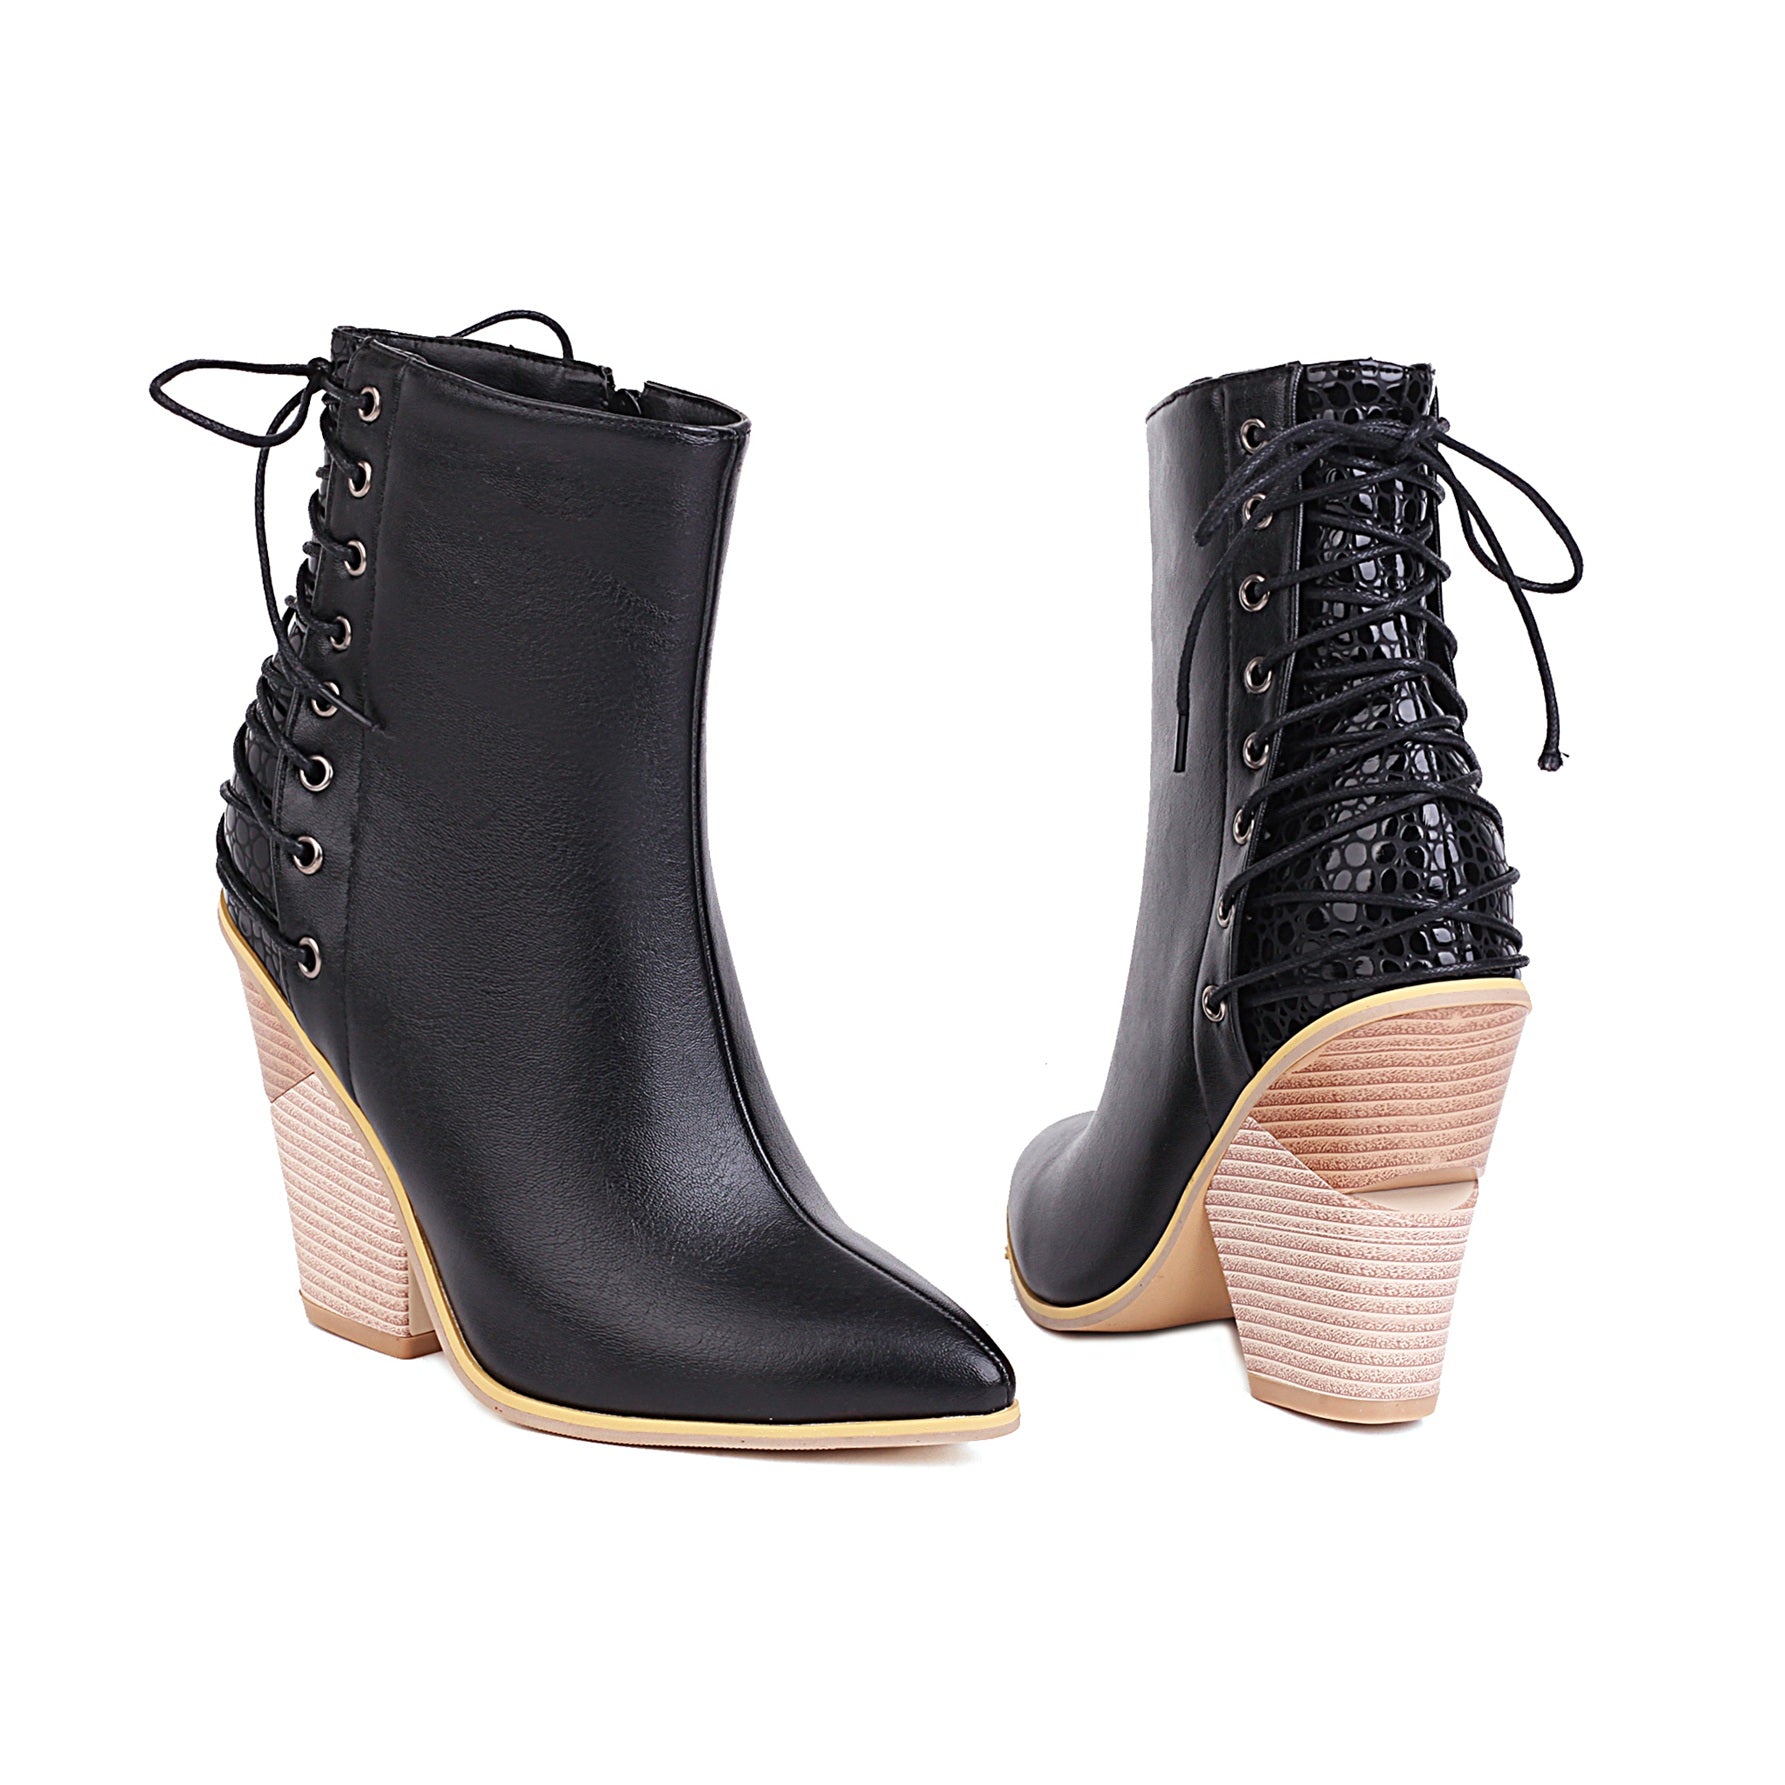 Bigsizeheels Stitched lace-up pointed ankle boots - Black freeshipping - bigsizeheel®-size5-size15 -All Plus Sizes Available!